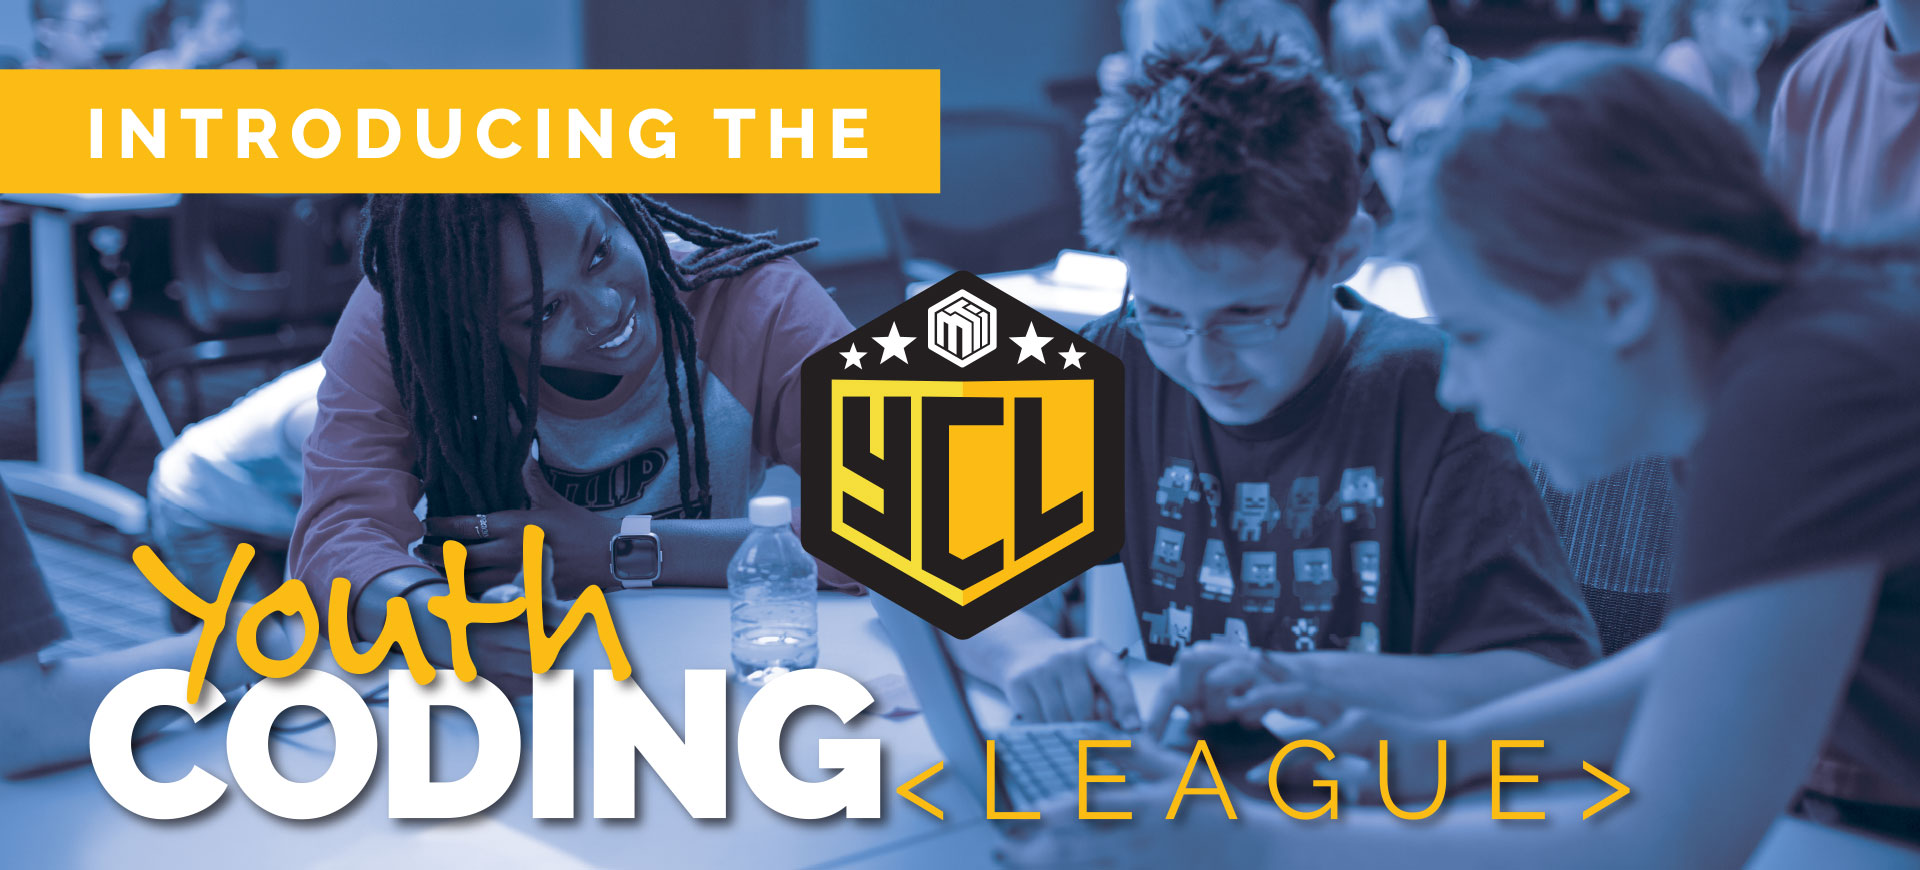 Introducing the Youth Coding League